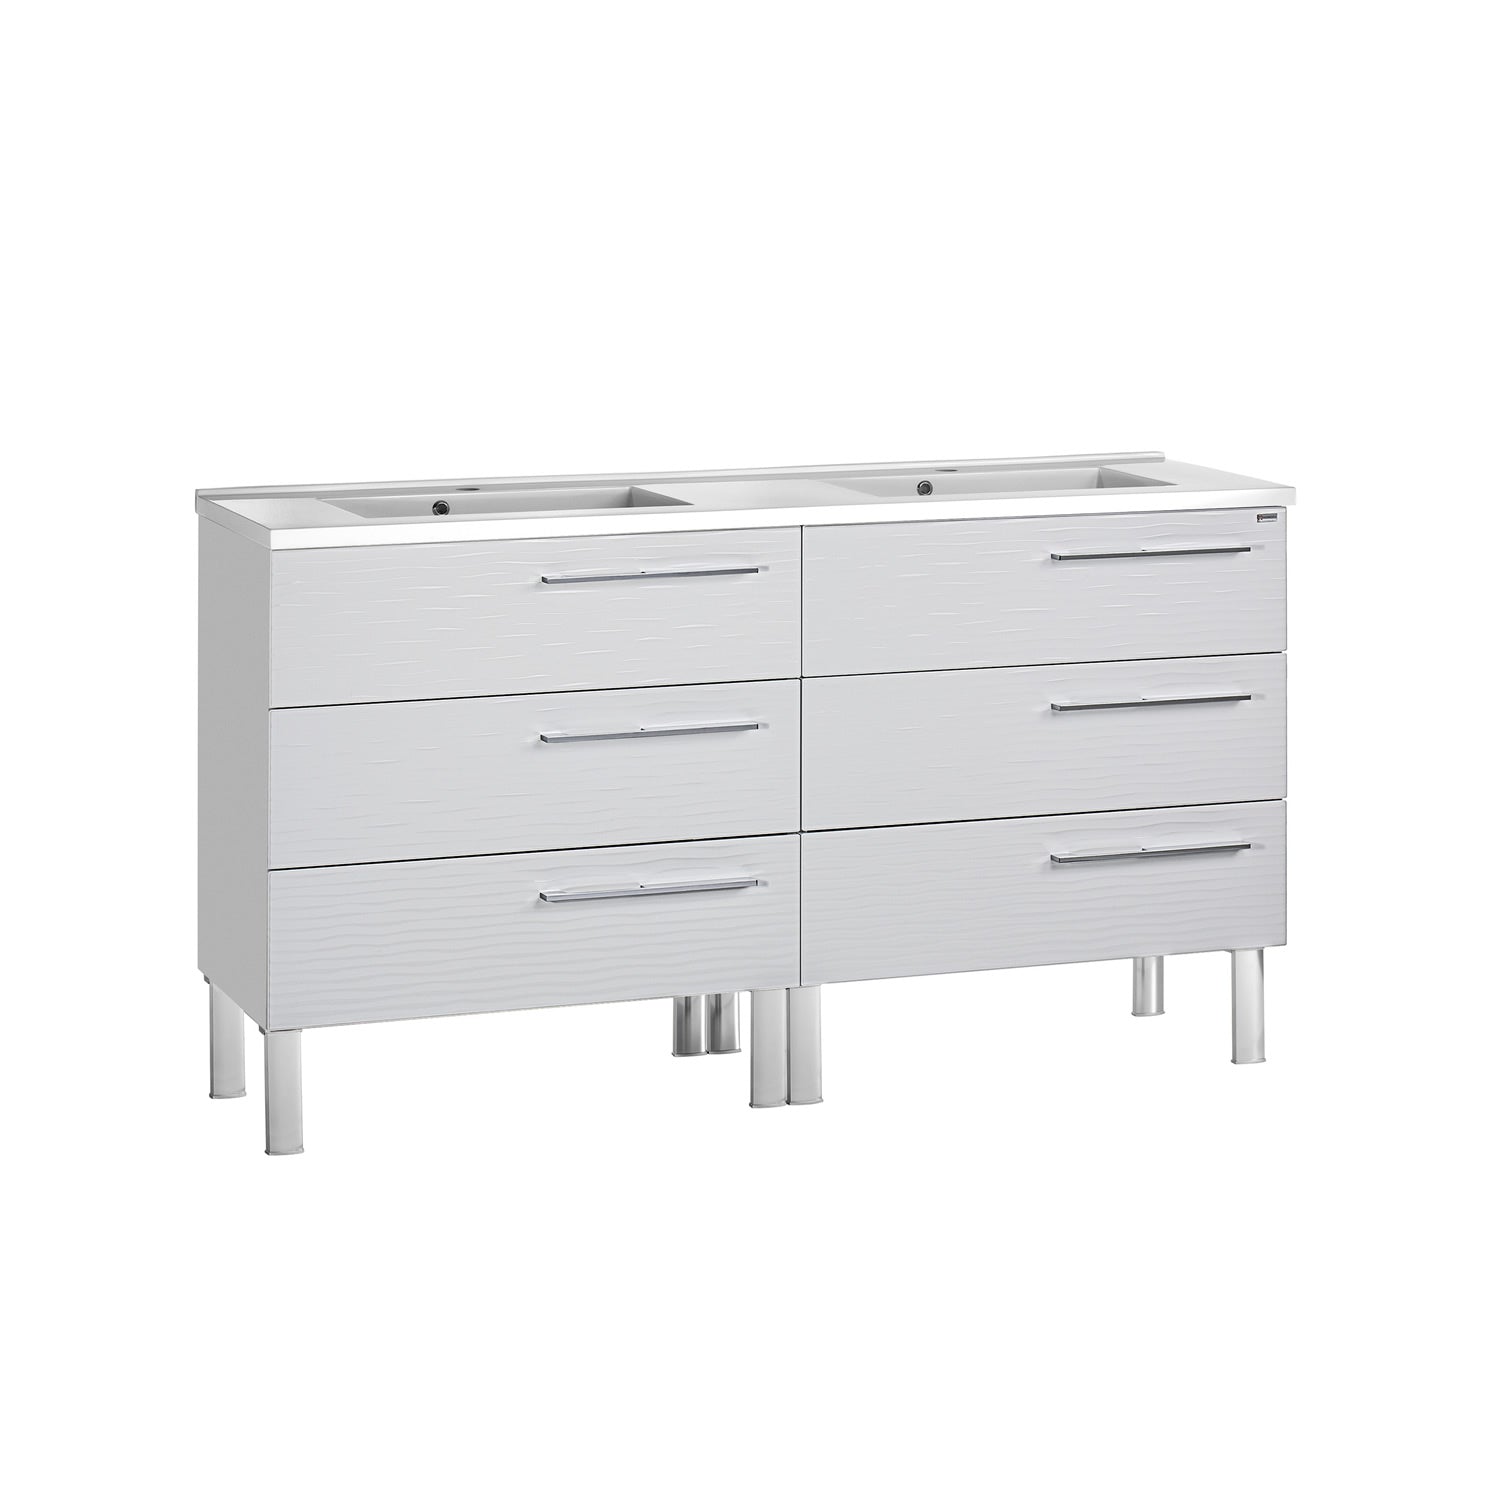 48" Double Vanity, Floor Mount, 6 Drawers with Soft Close, Serie Dune by VALENZUELA